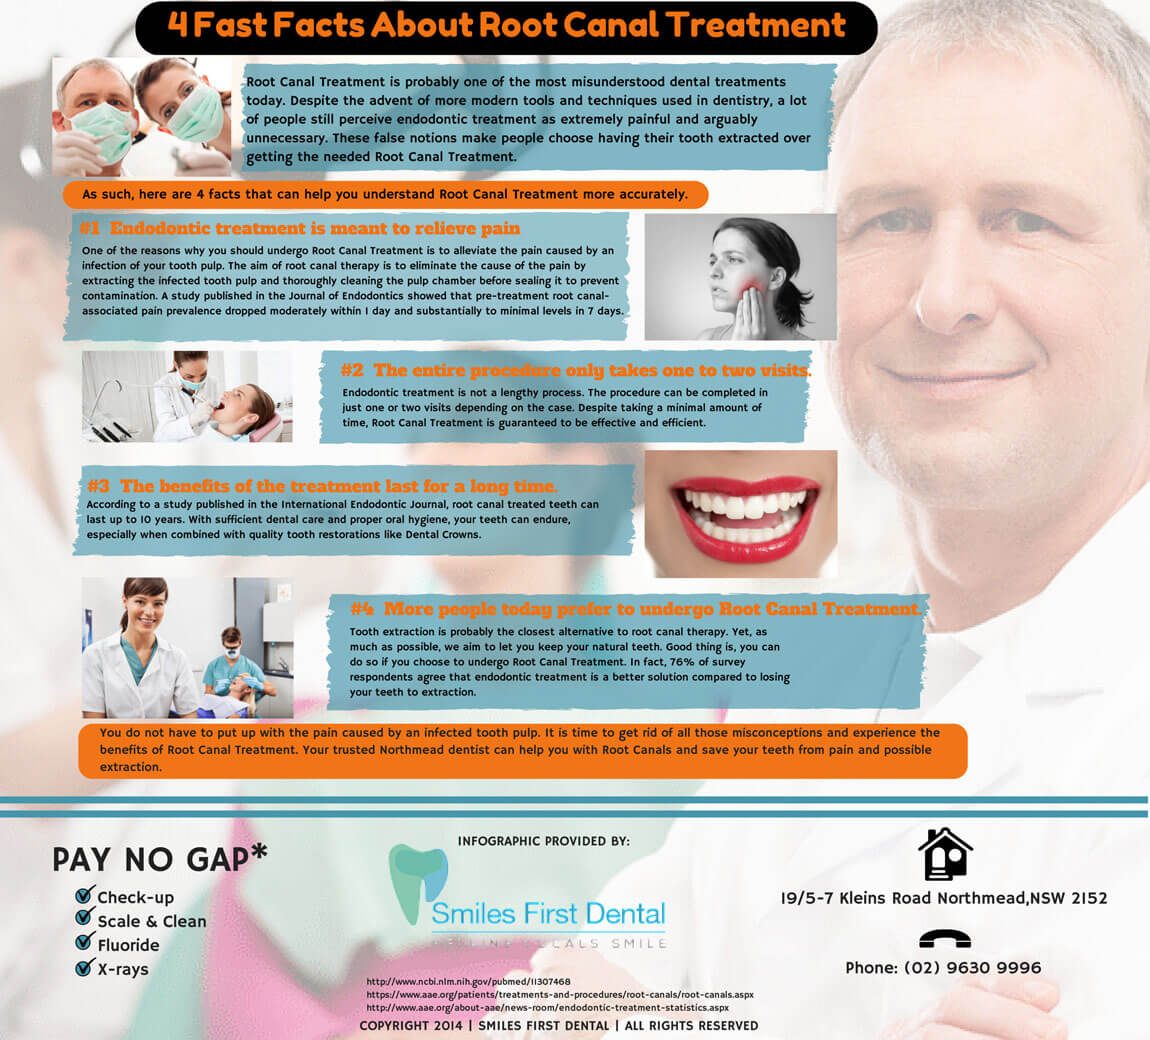 4-Fast-Facts-About-Root-Canal-Treatment